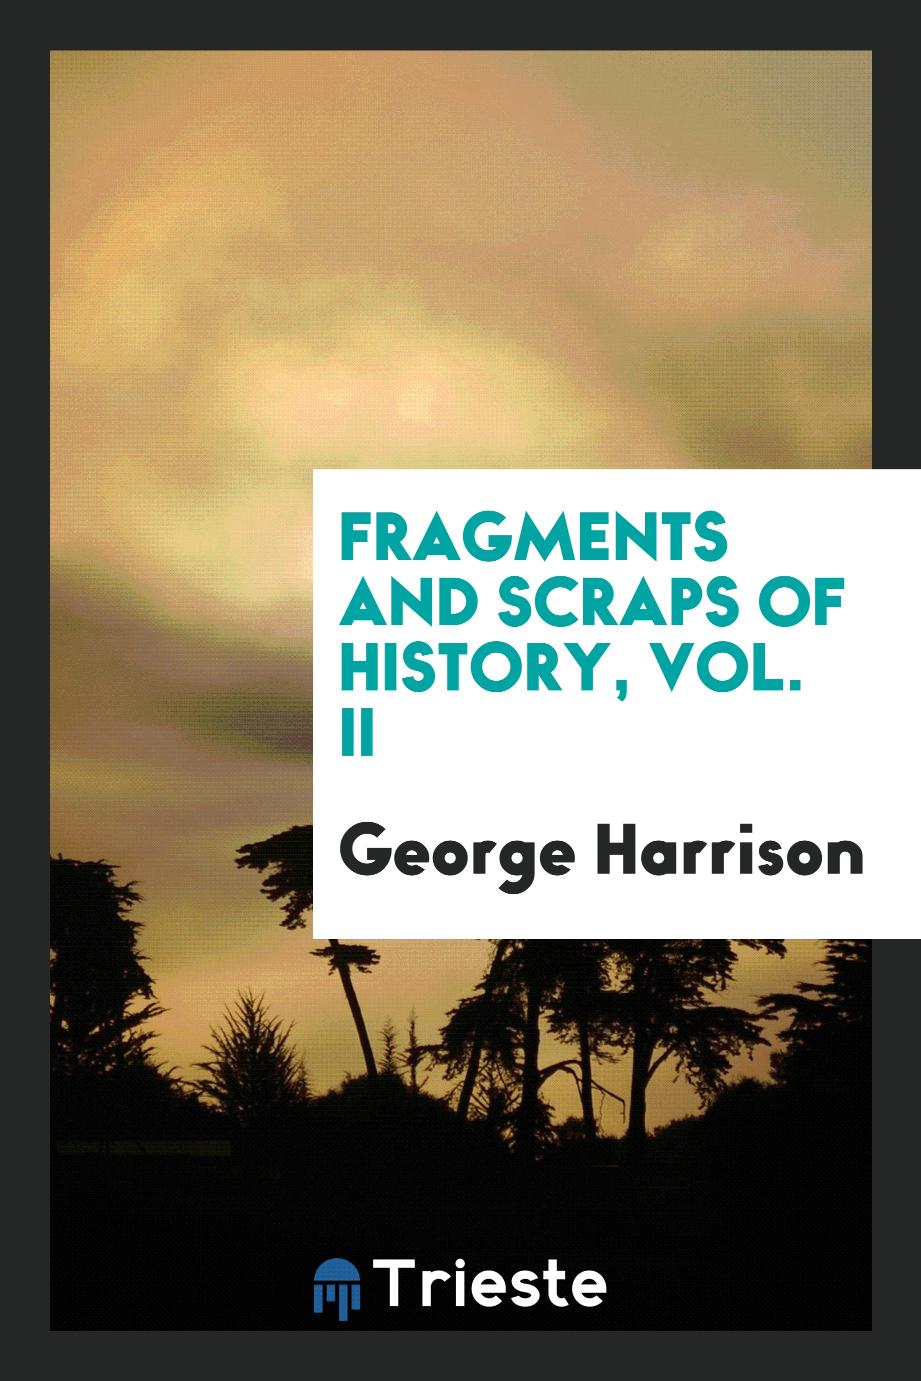 George Harrison - Fragments and Scraps of History, Vol. II